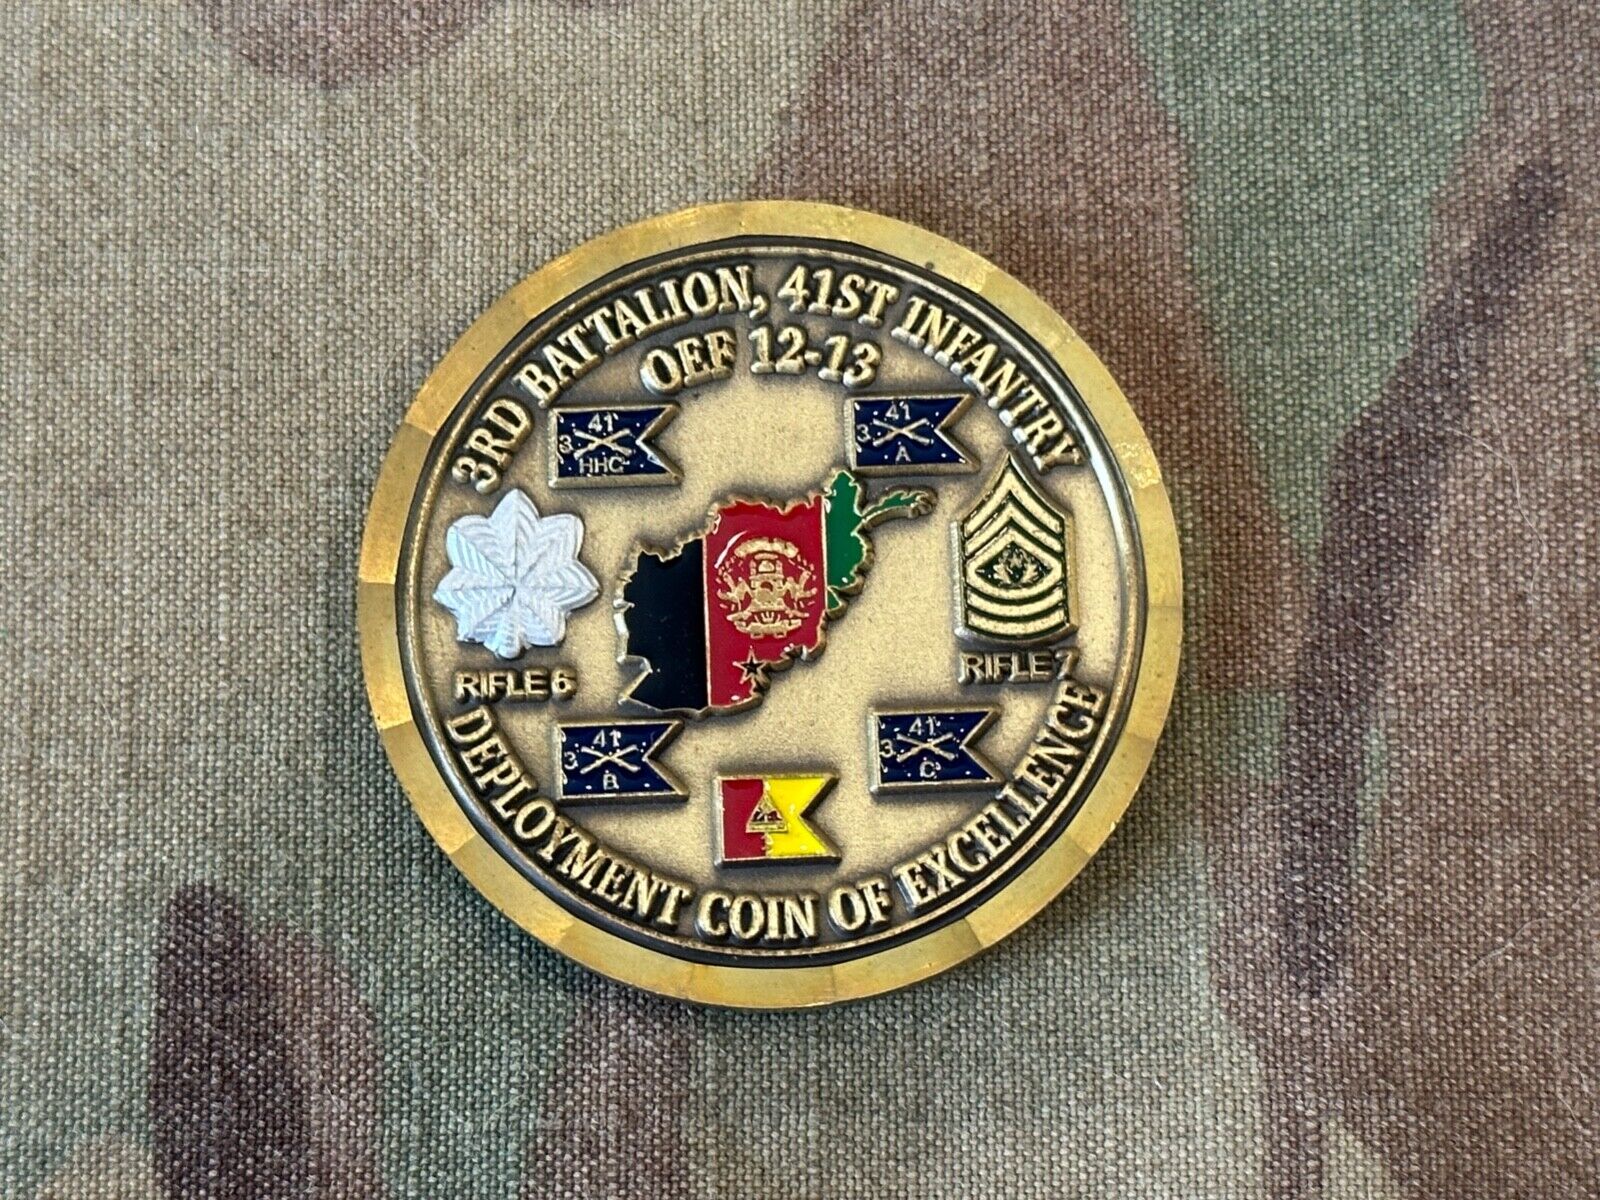 3rd Battalion 41st Infantry OEF 12-13 TF Rifles 1/1 AD sn#865 Challenge Coin